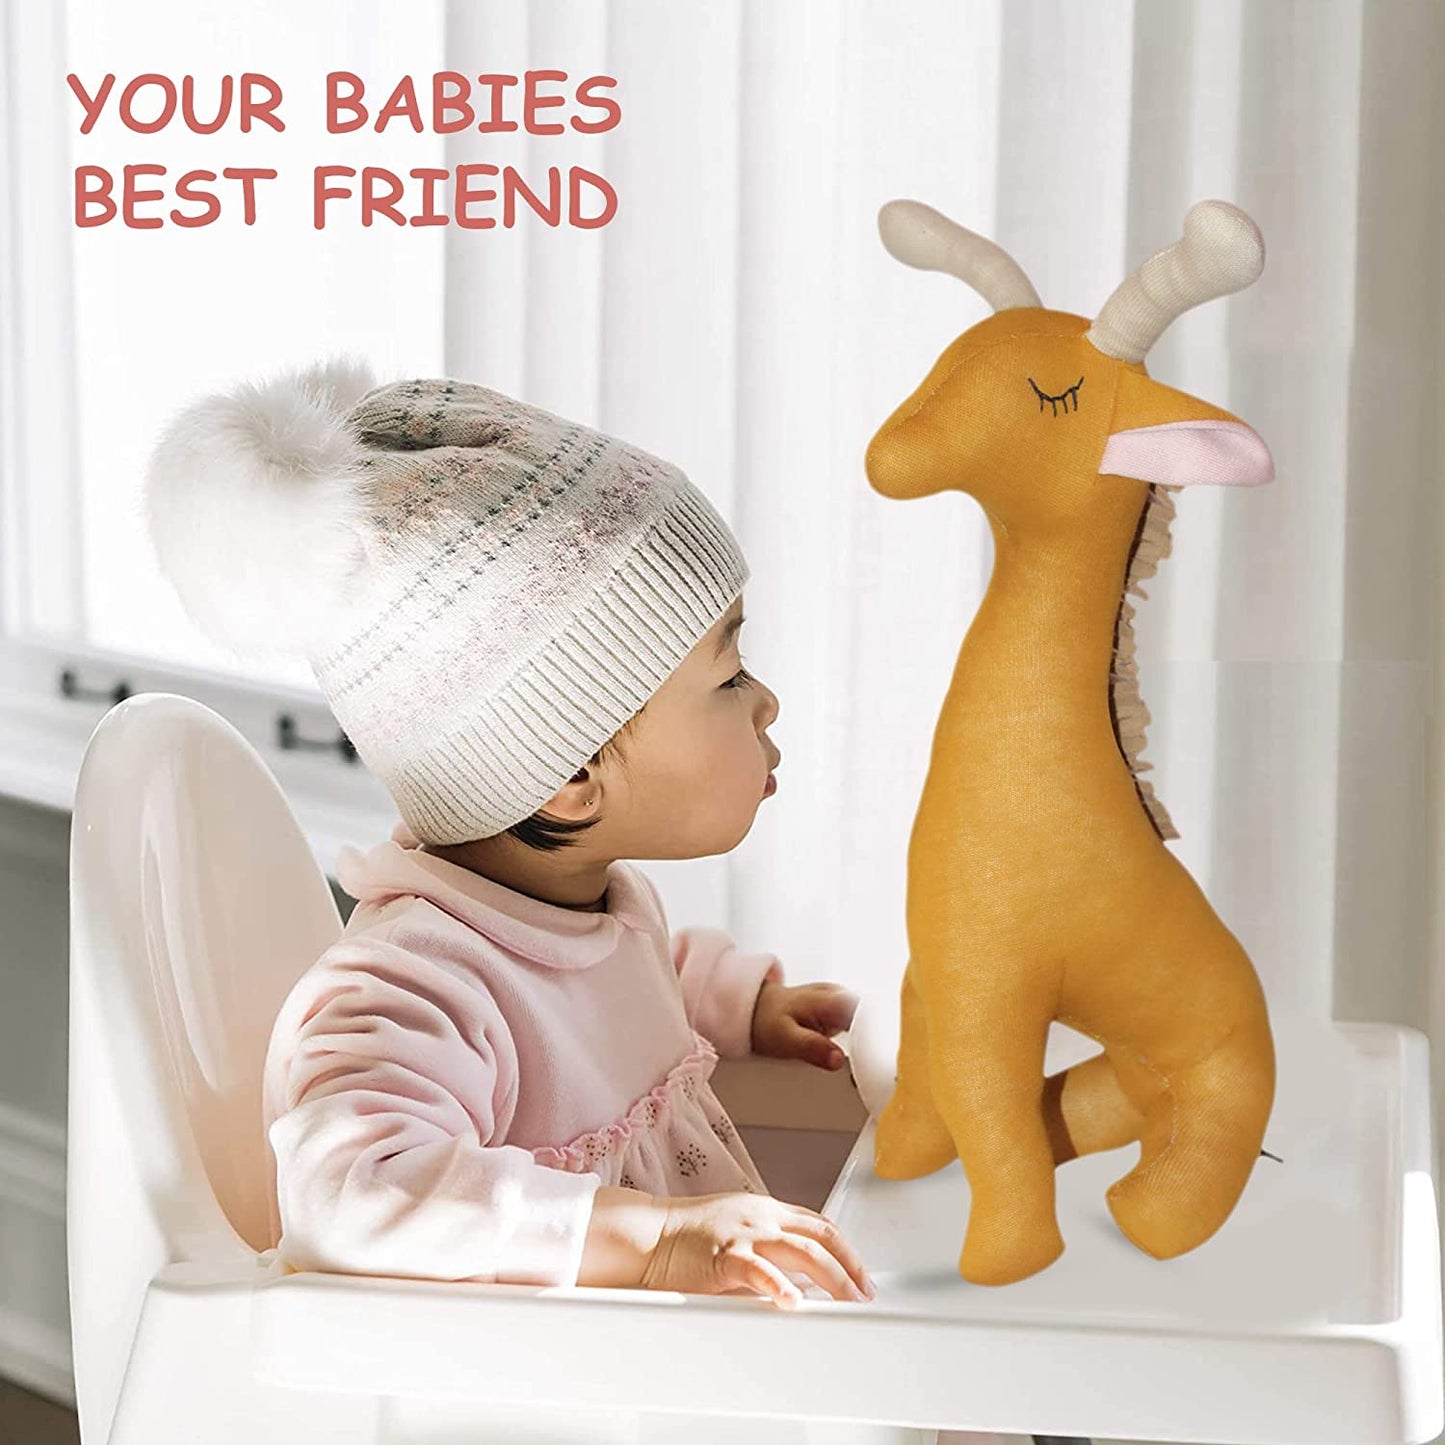 Giraffe Soft Toys for Kids Super Stuffed Toy,Heavy Stitched Durable Baby Safe Soft Cotton Fabric (52 cm, Mustard)